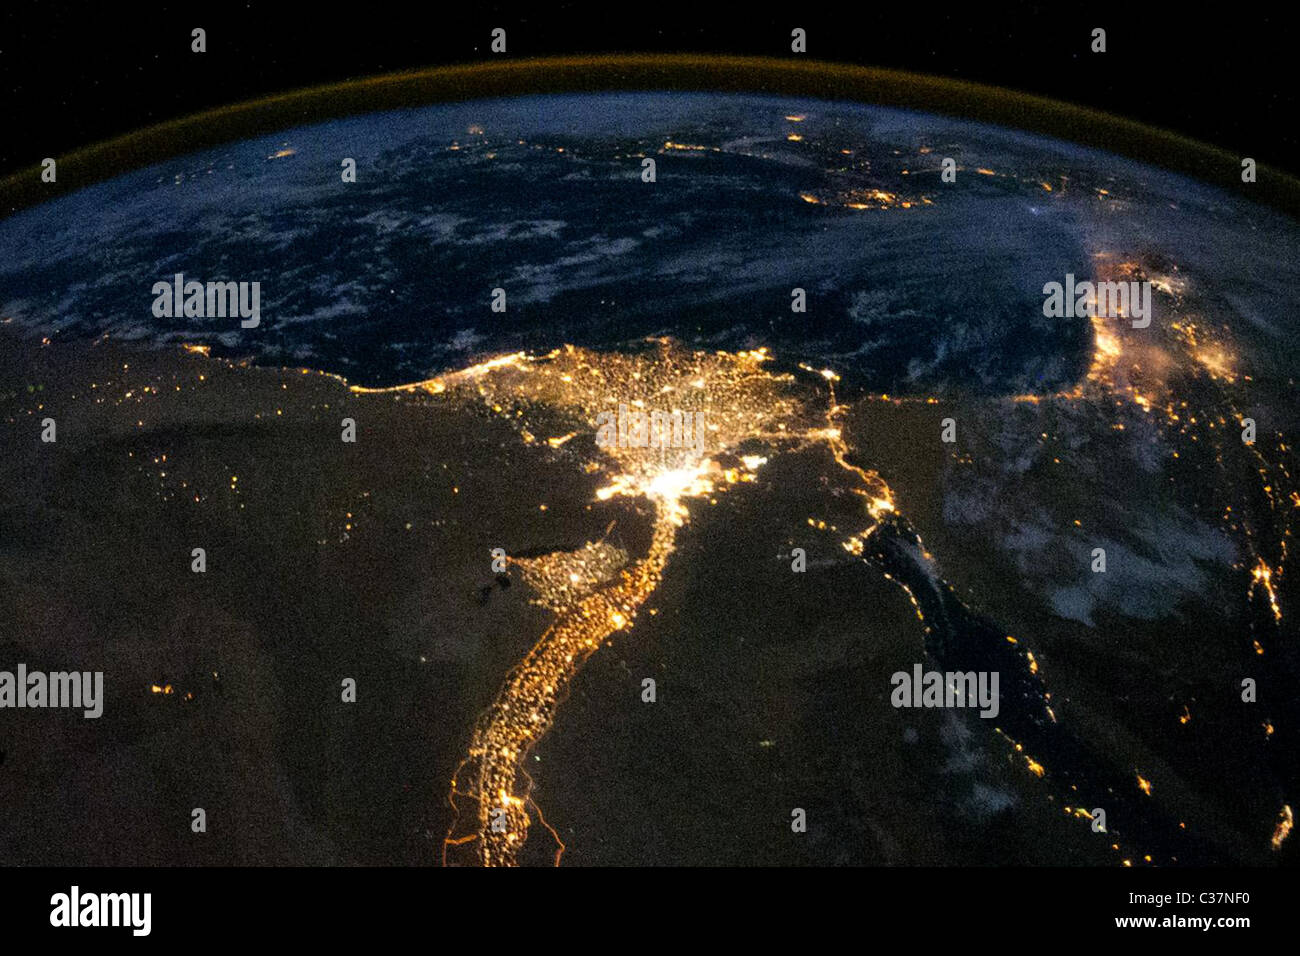 Egypt viewed from space showing the Nile Valley, Nile River and Cairo at night Stock Photo